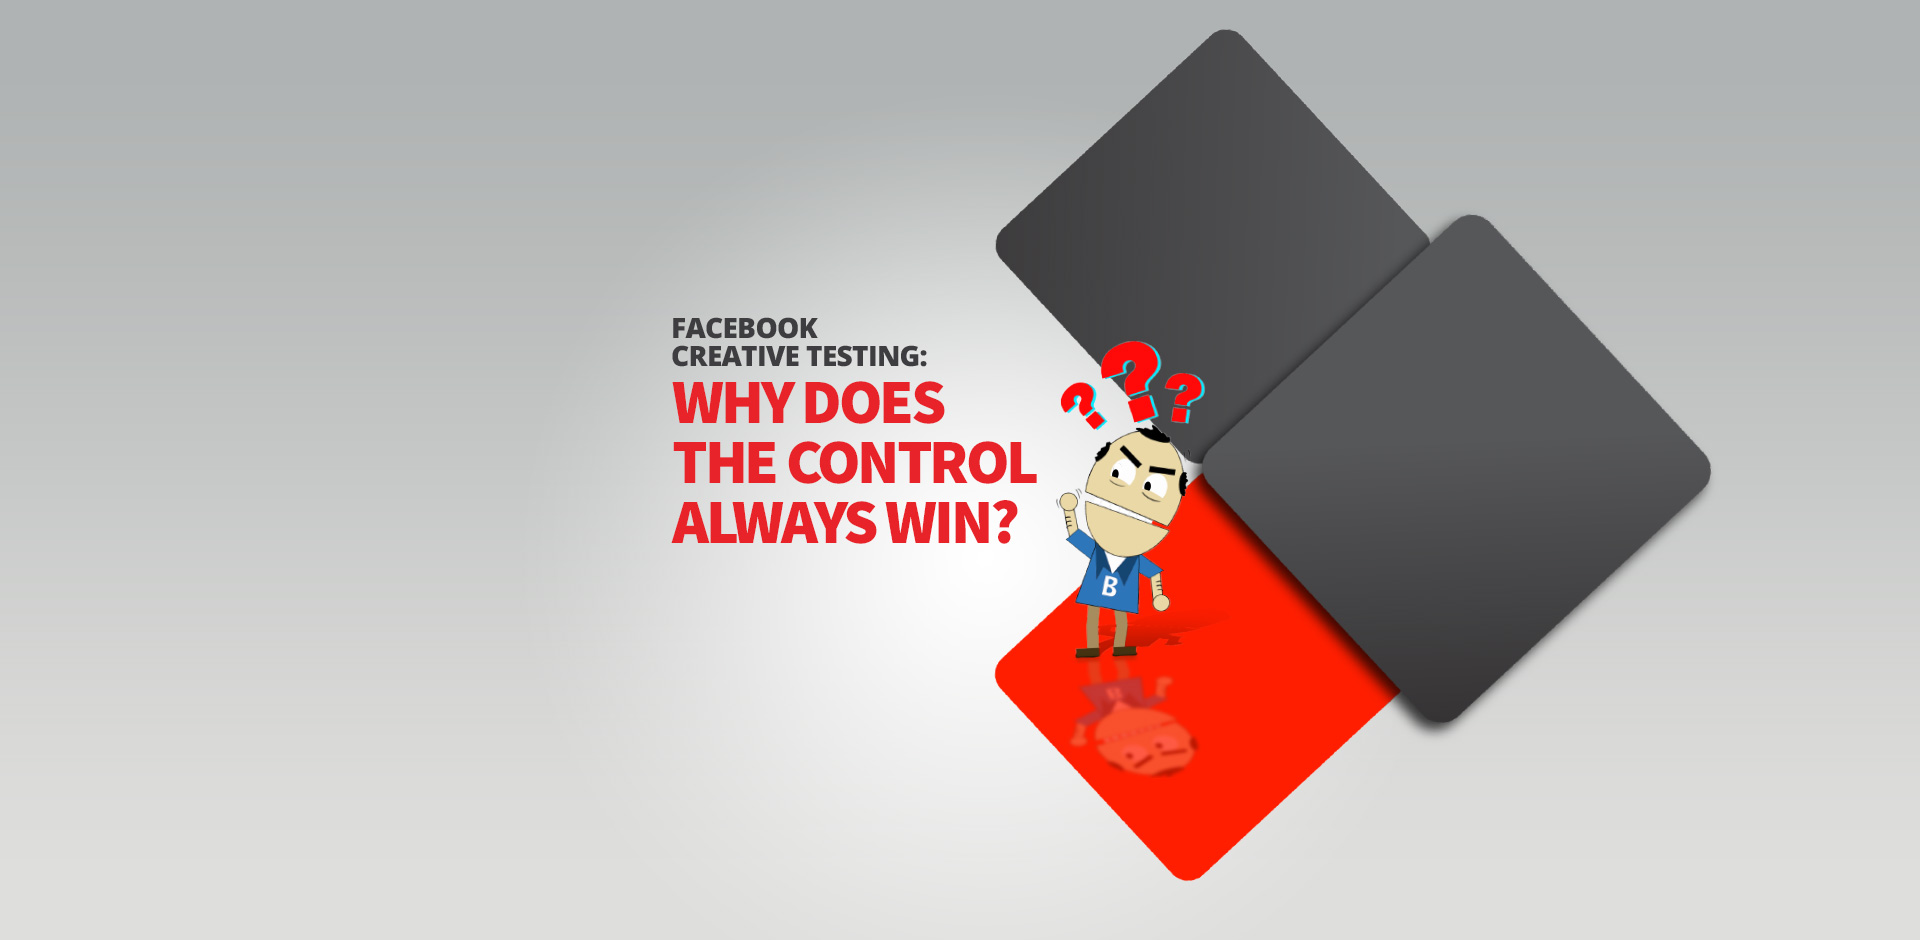 Facebook Creative Testing: Why Does The Control Always Win?